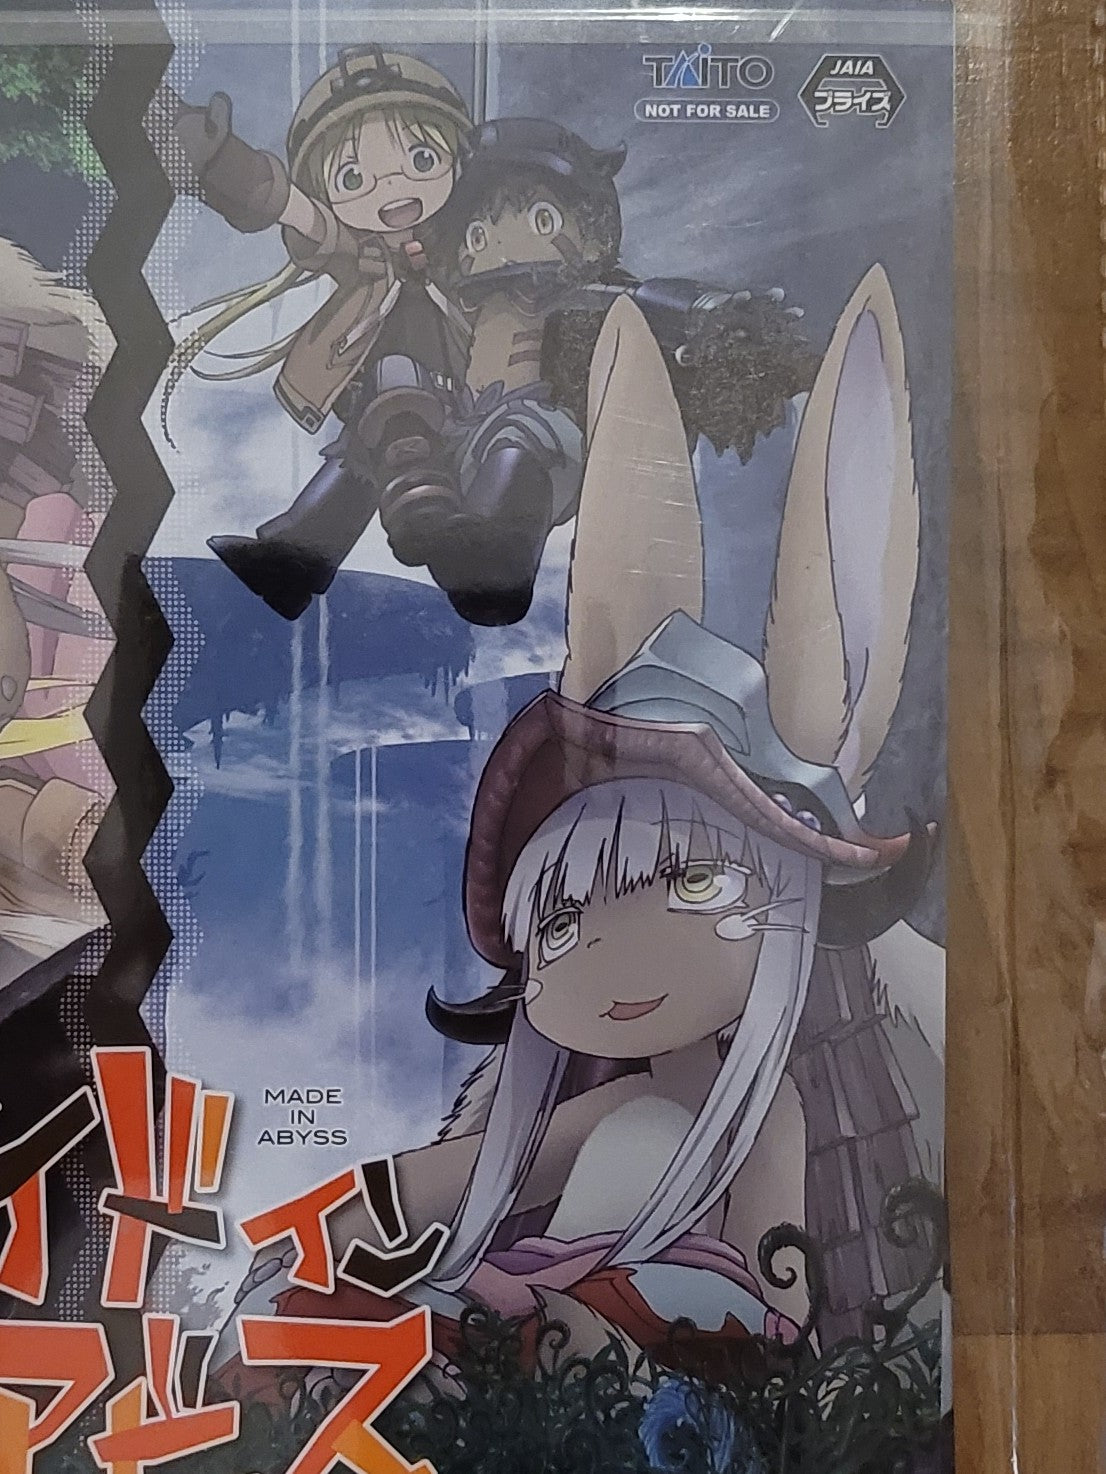 Made in Abyss Wandtuch Nippon4U